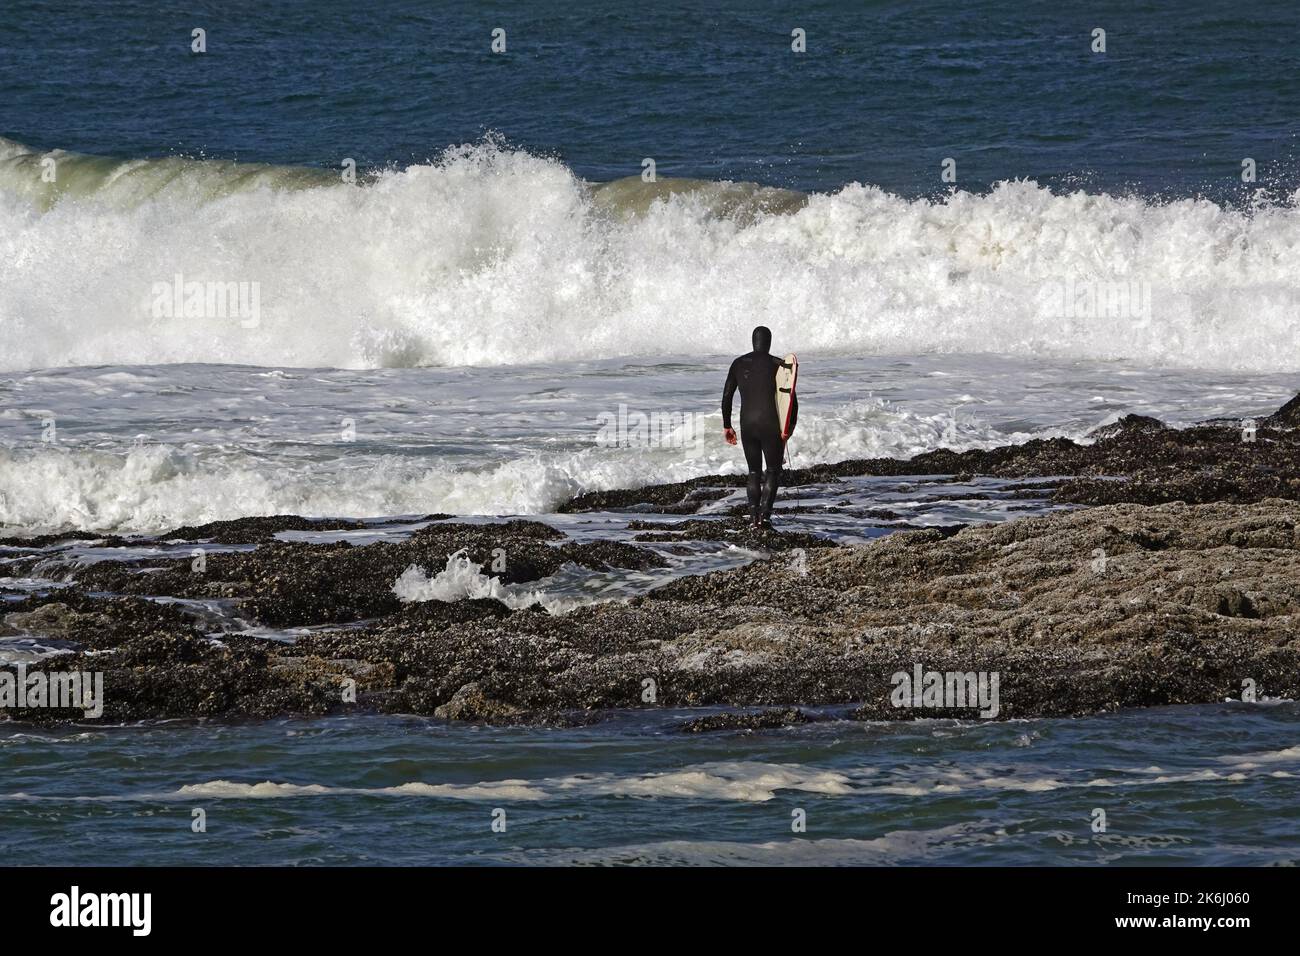 A surfer in a wetsuit prepares to go in the water from a rocky reef along the Oregon Coast near the town of Waldport, Oregon. Swimmer is unrecognizabl Stock Photo